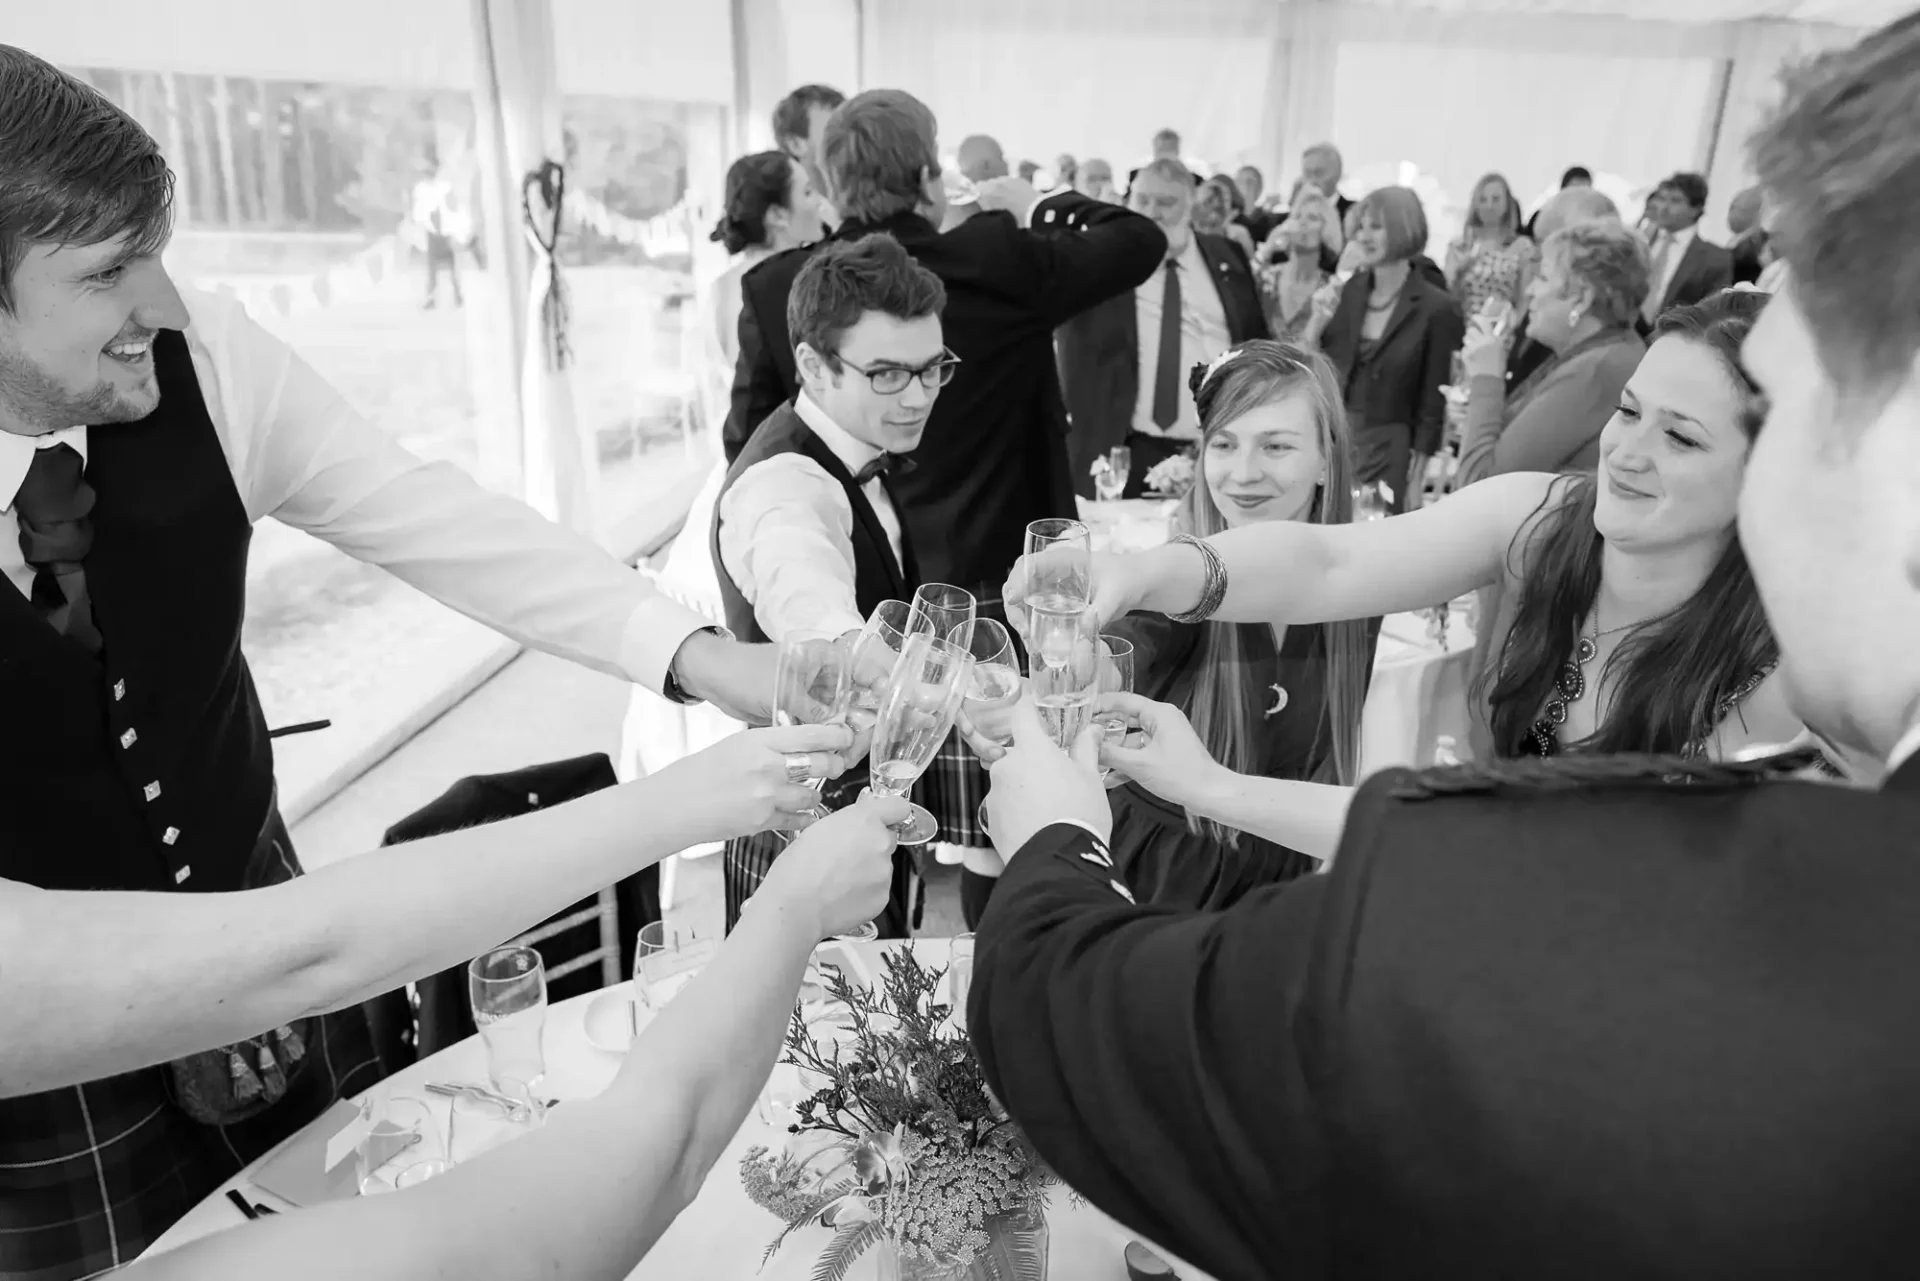 A group of people in formal attire making a toast with wine glasses at a festive gathering inside a tent.